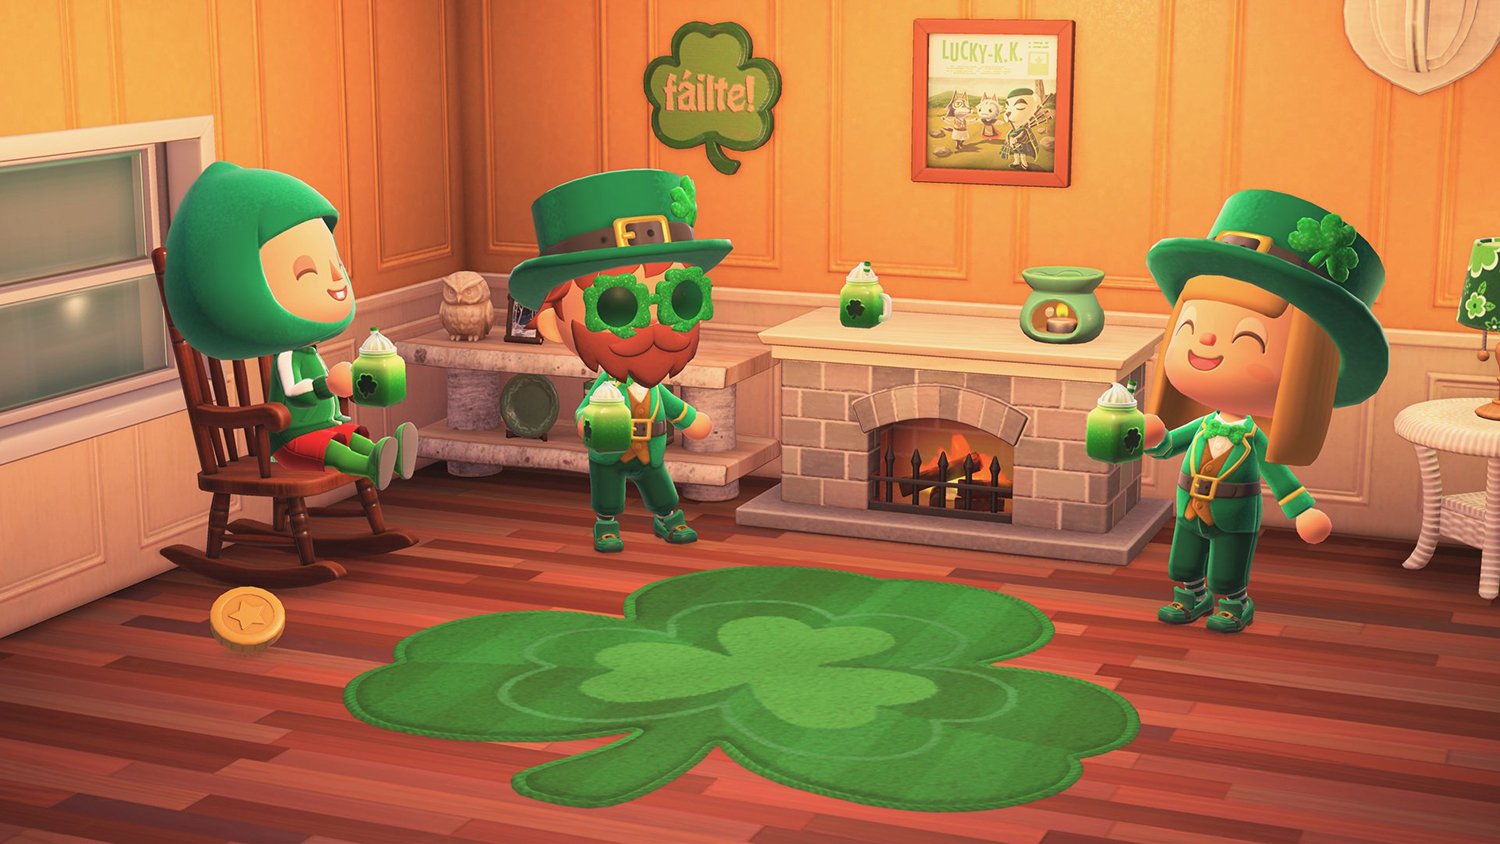 The Shamrock Day event in March in Animal Crossing: New Horizons